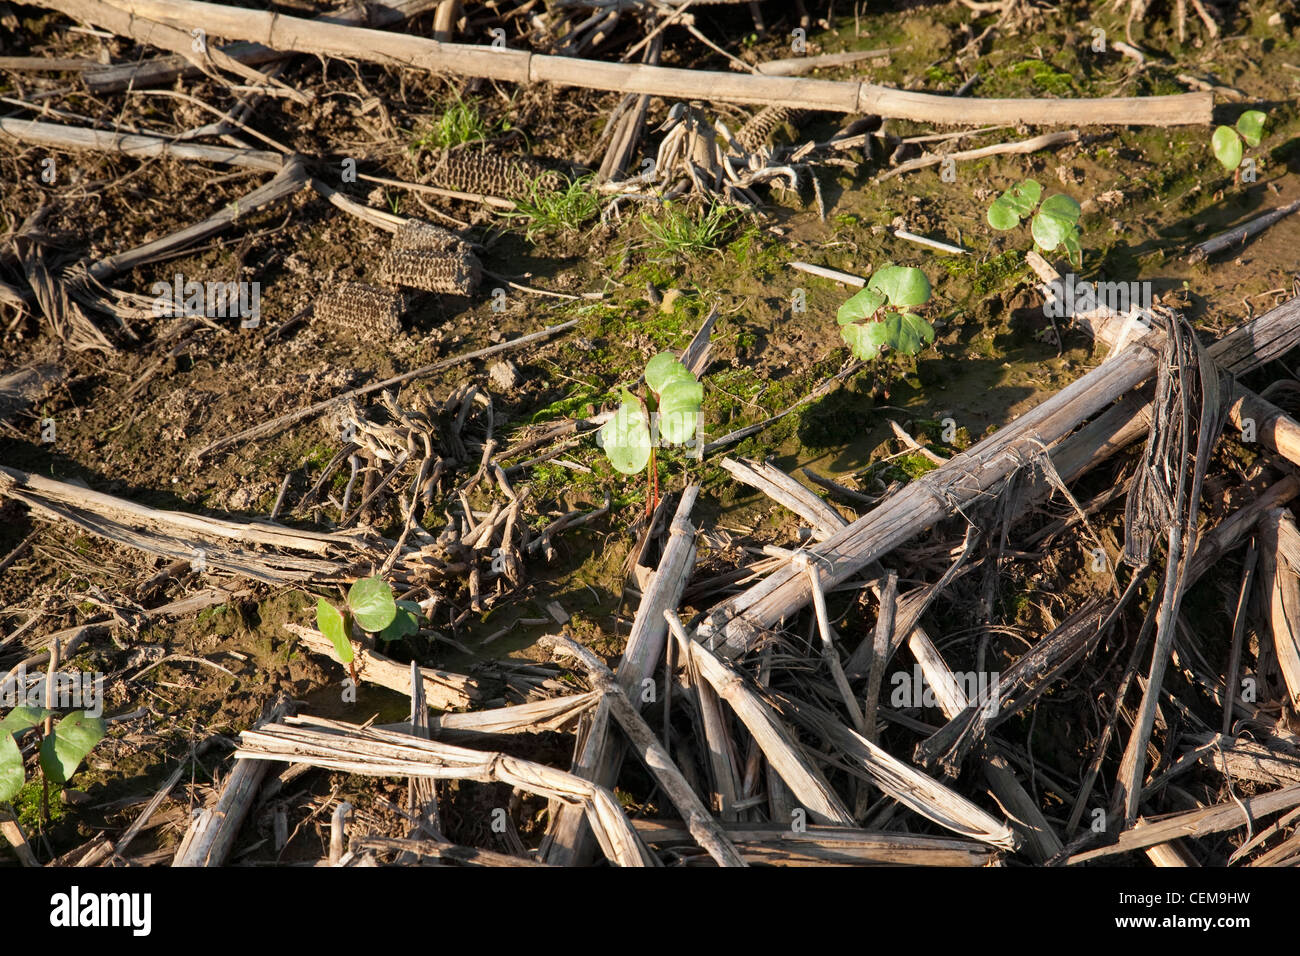 Cotton seedlings at the first true leaf stage, planted no-till in residue of the previous year’s corn crop / Arkansas, USA. Stock Photo